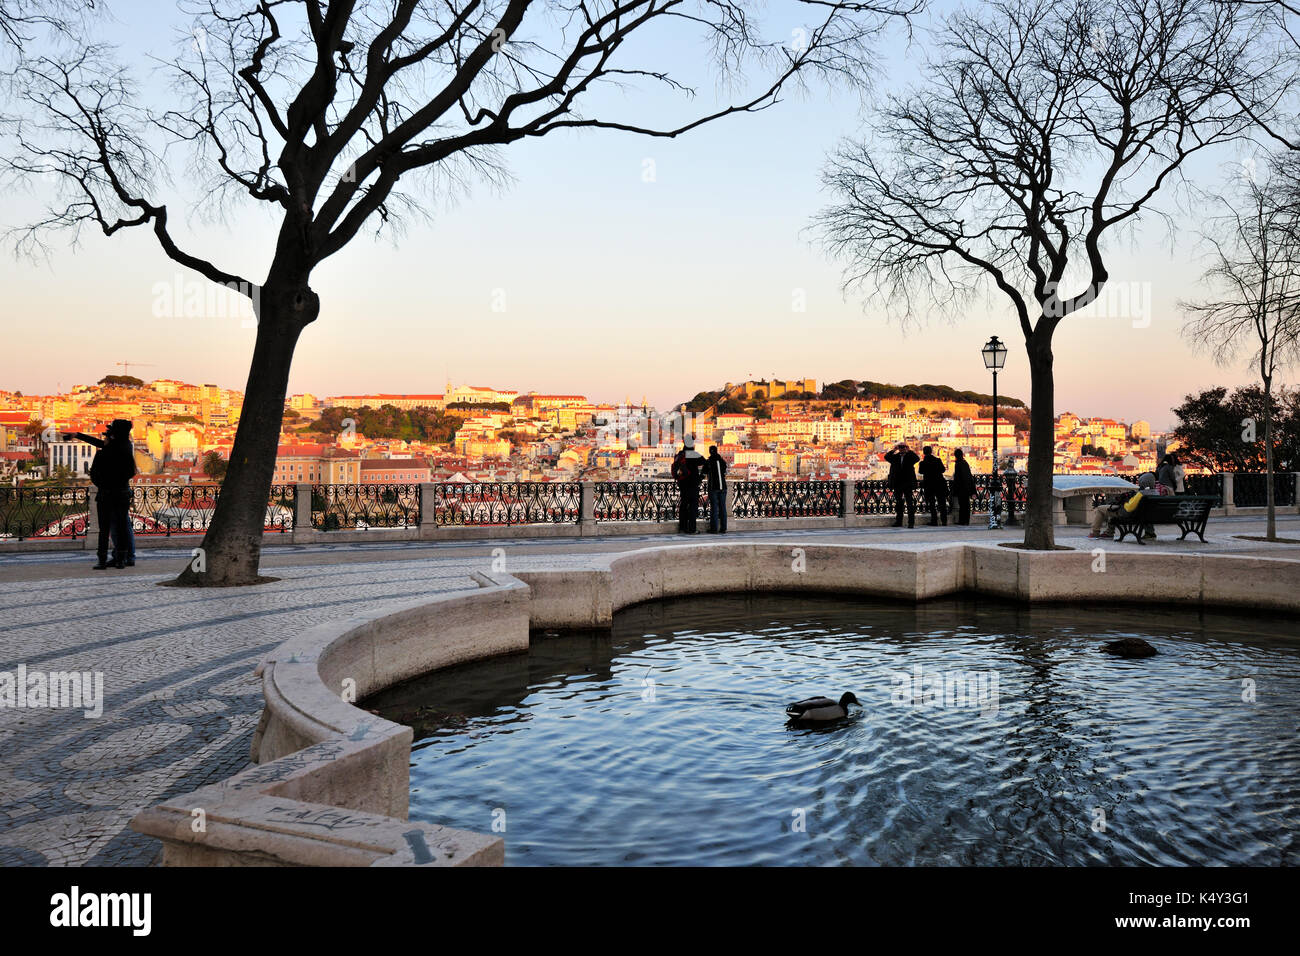 São Pedro de Alcantara belvedere, one of the best view points of the old city of Lisbon. Portugal Stock Photo